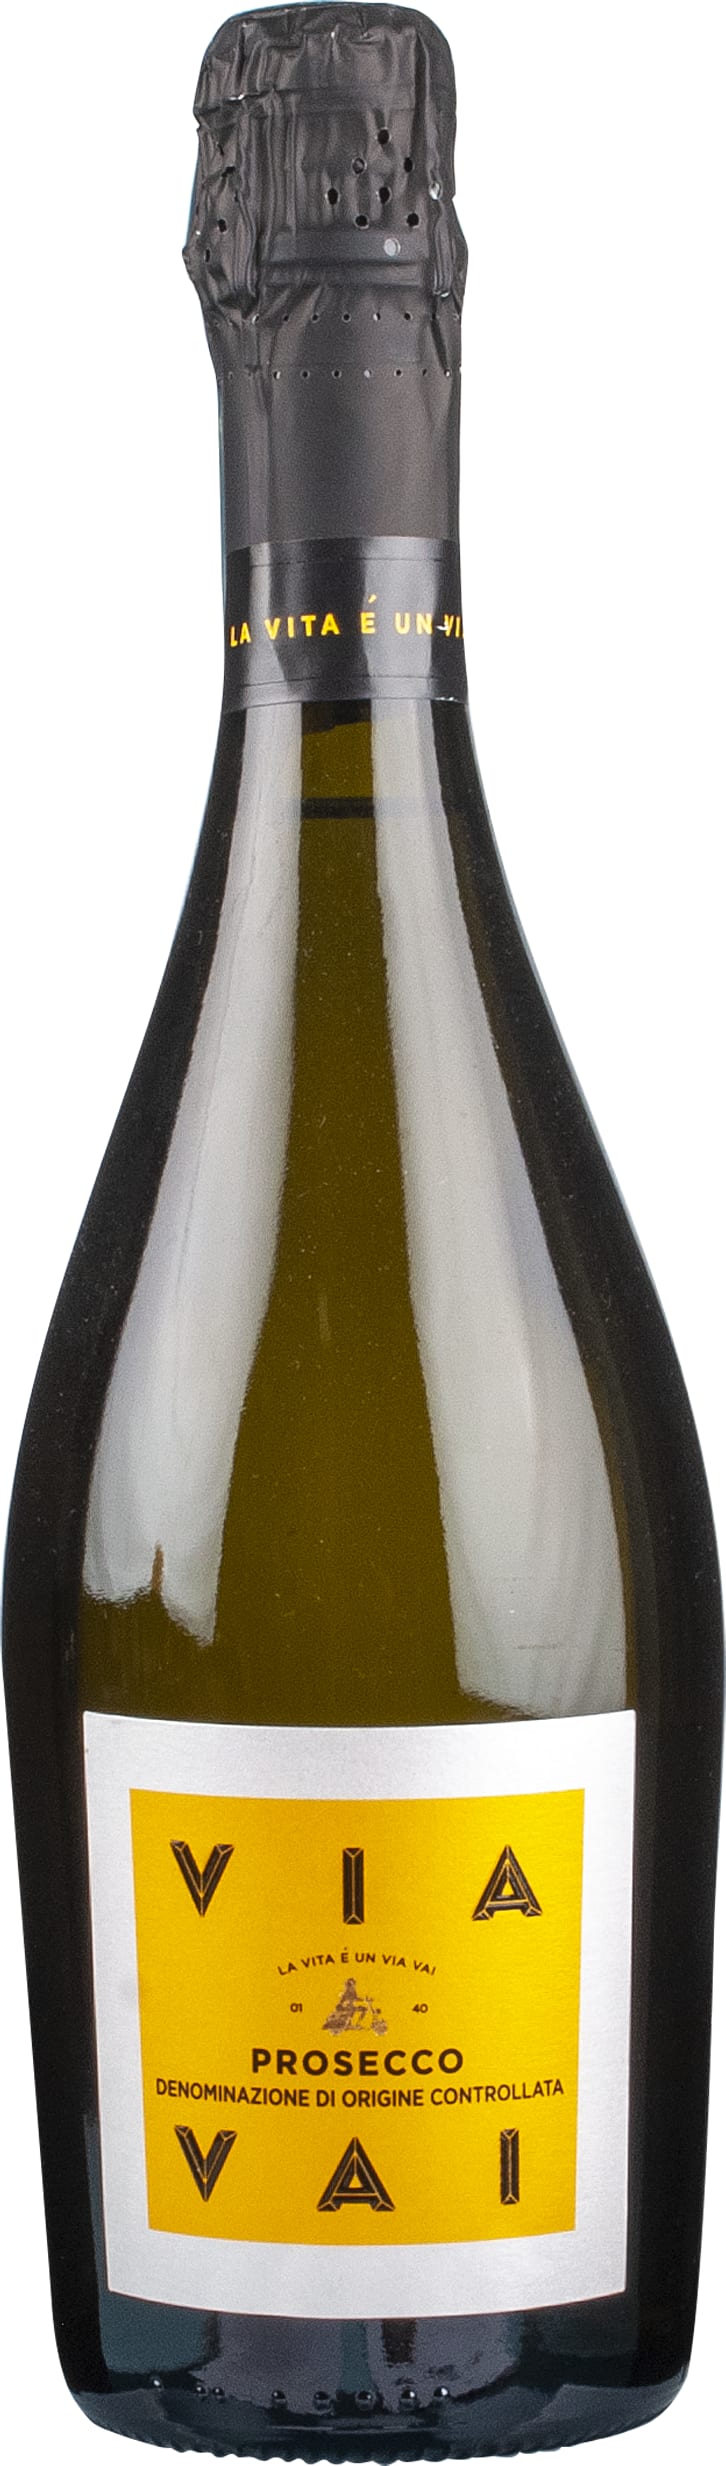 Via Vai Prosecco 75cl NV - Buy Via Vai Wines from GREAT WINES DIRECT wine shop